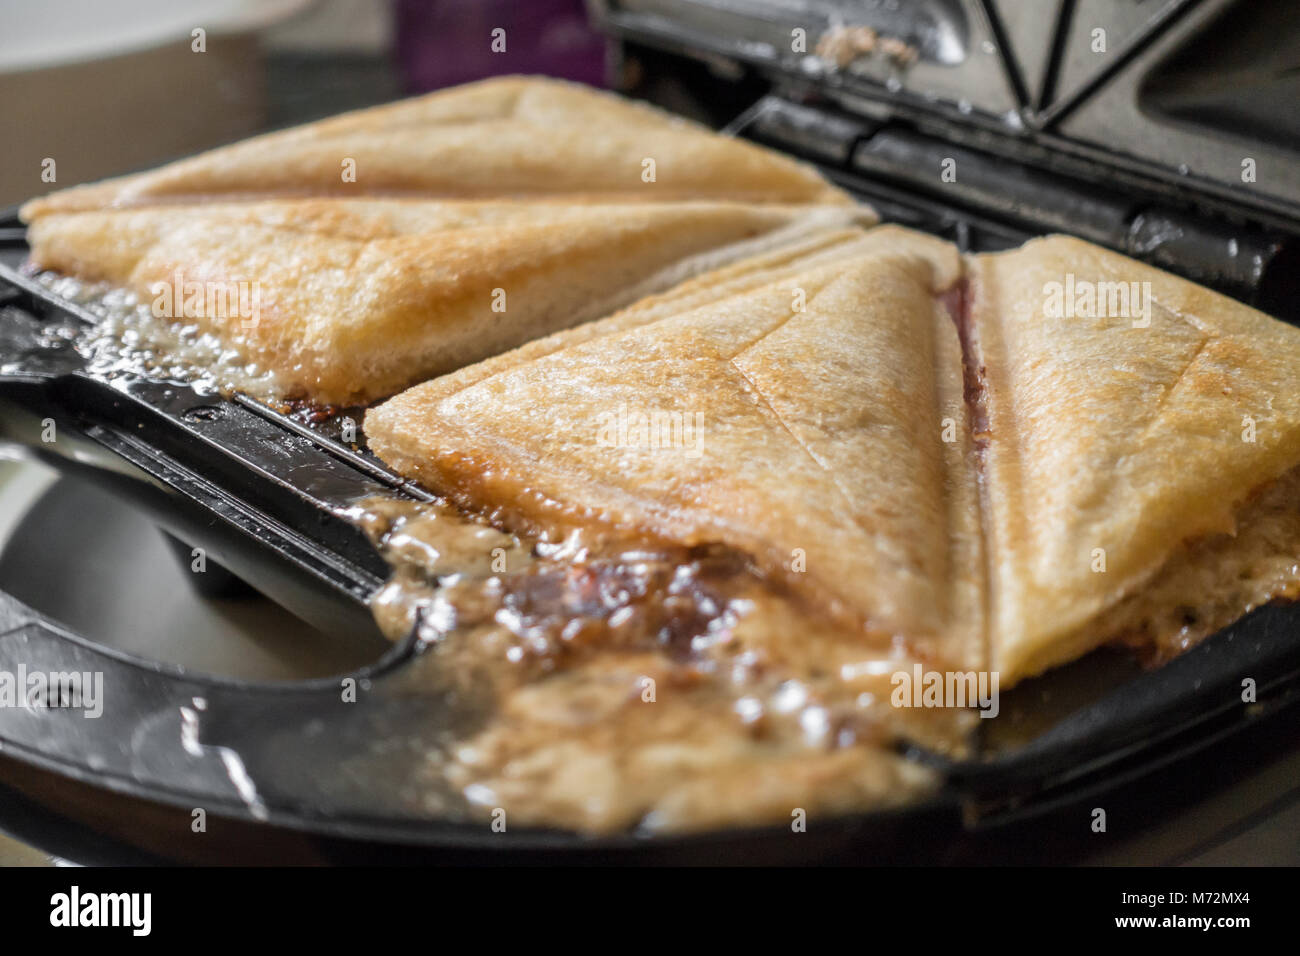 https://c8.alamy.com/comp/M72MX4/ham-and-cheese-toasted-sandwiches-in-a-toasted-sandwich-maker-M72MX4.jpg